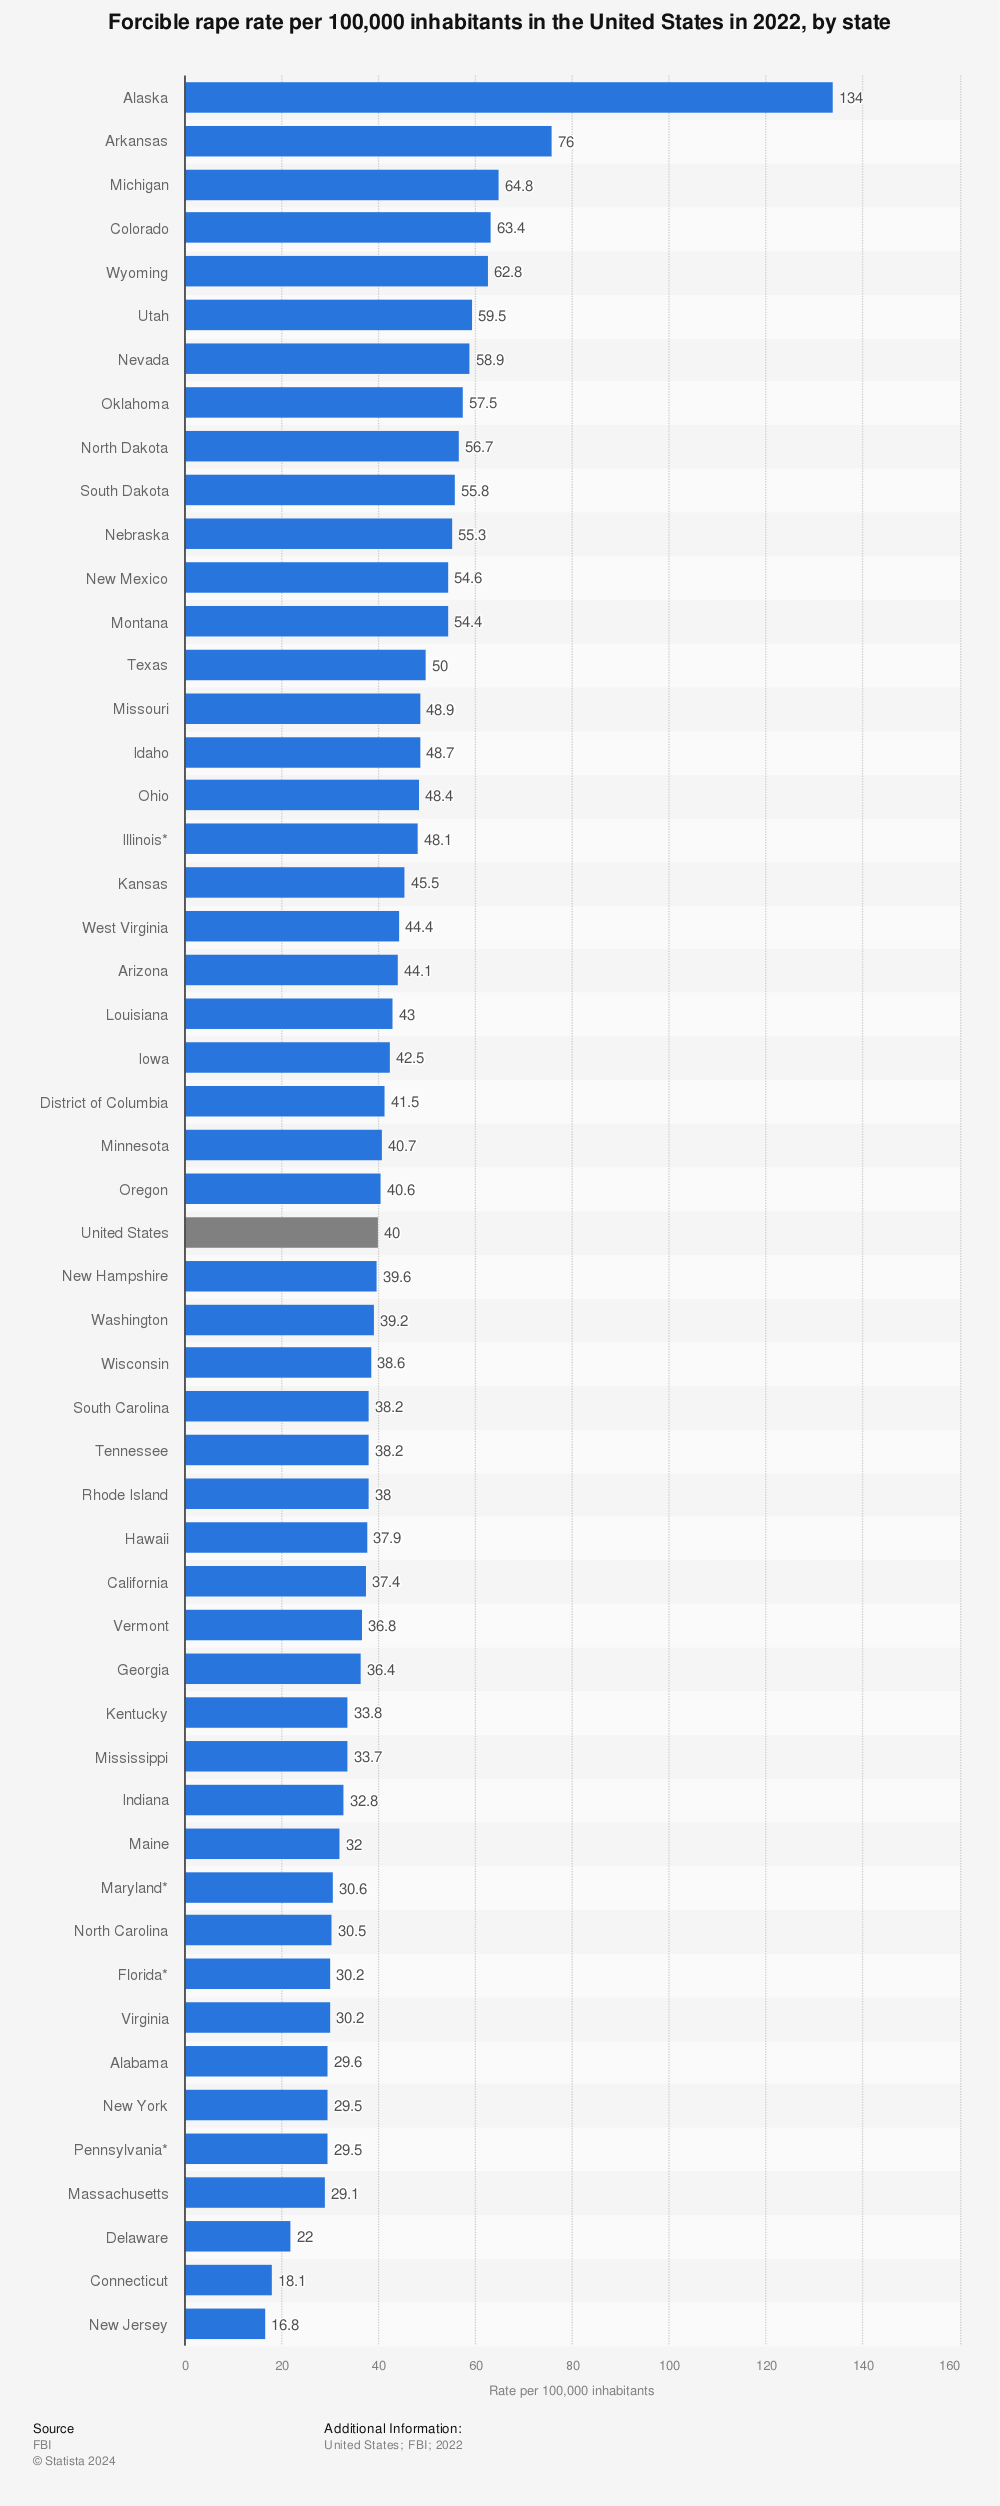 Statistic: Forcible rape rate per 100,000 inhabitants in the United States in 2020, by state | Statista